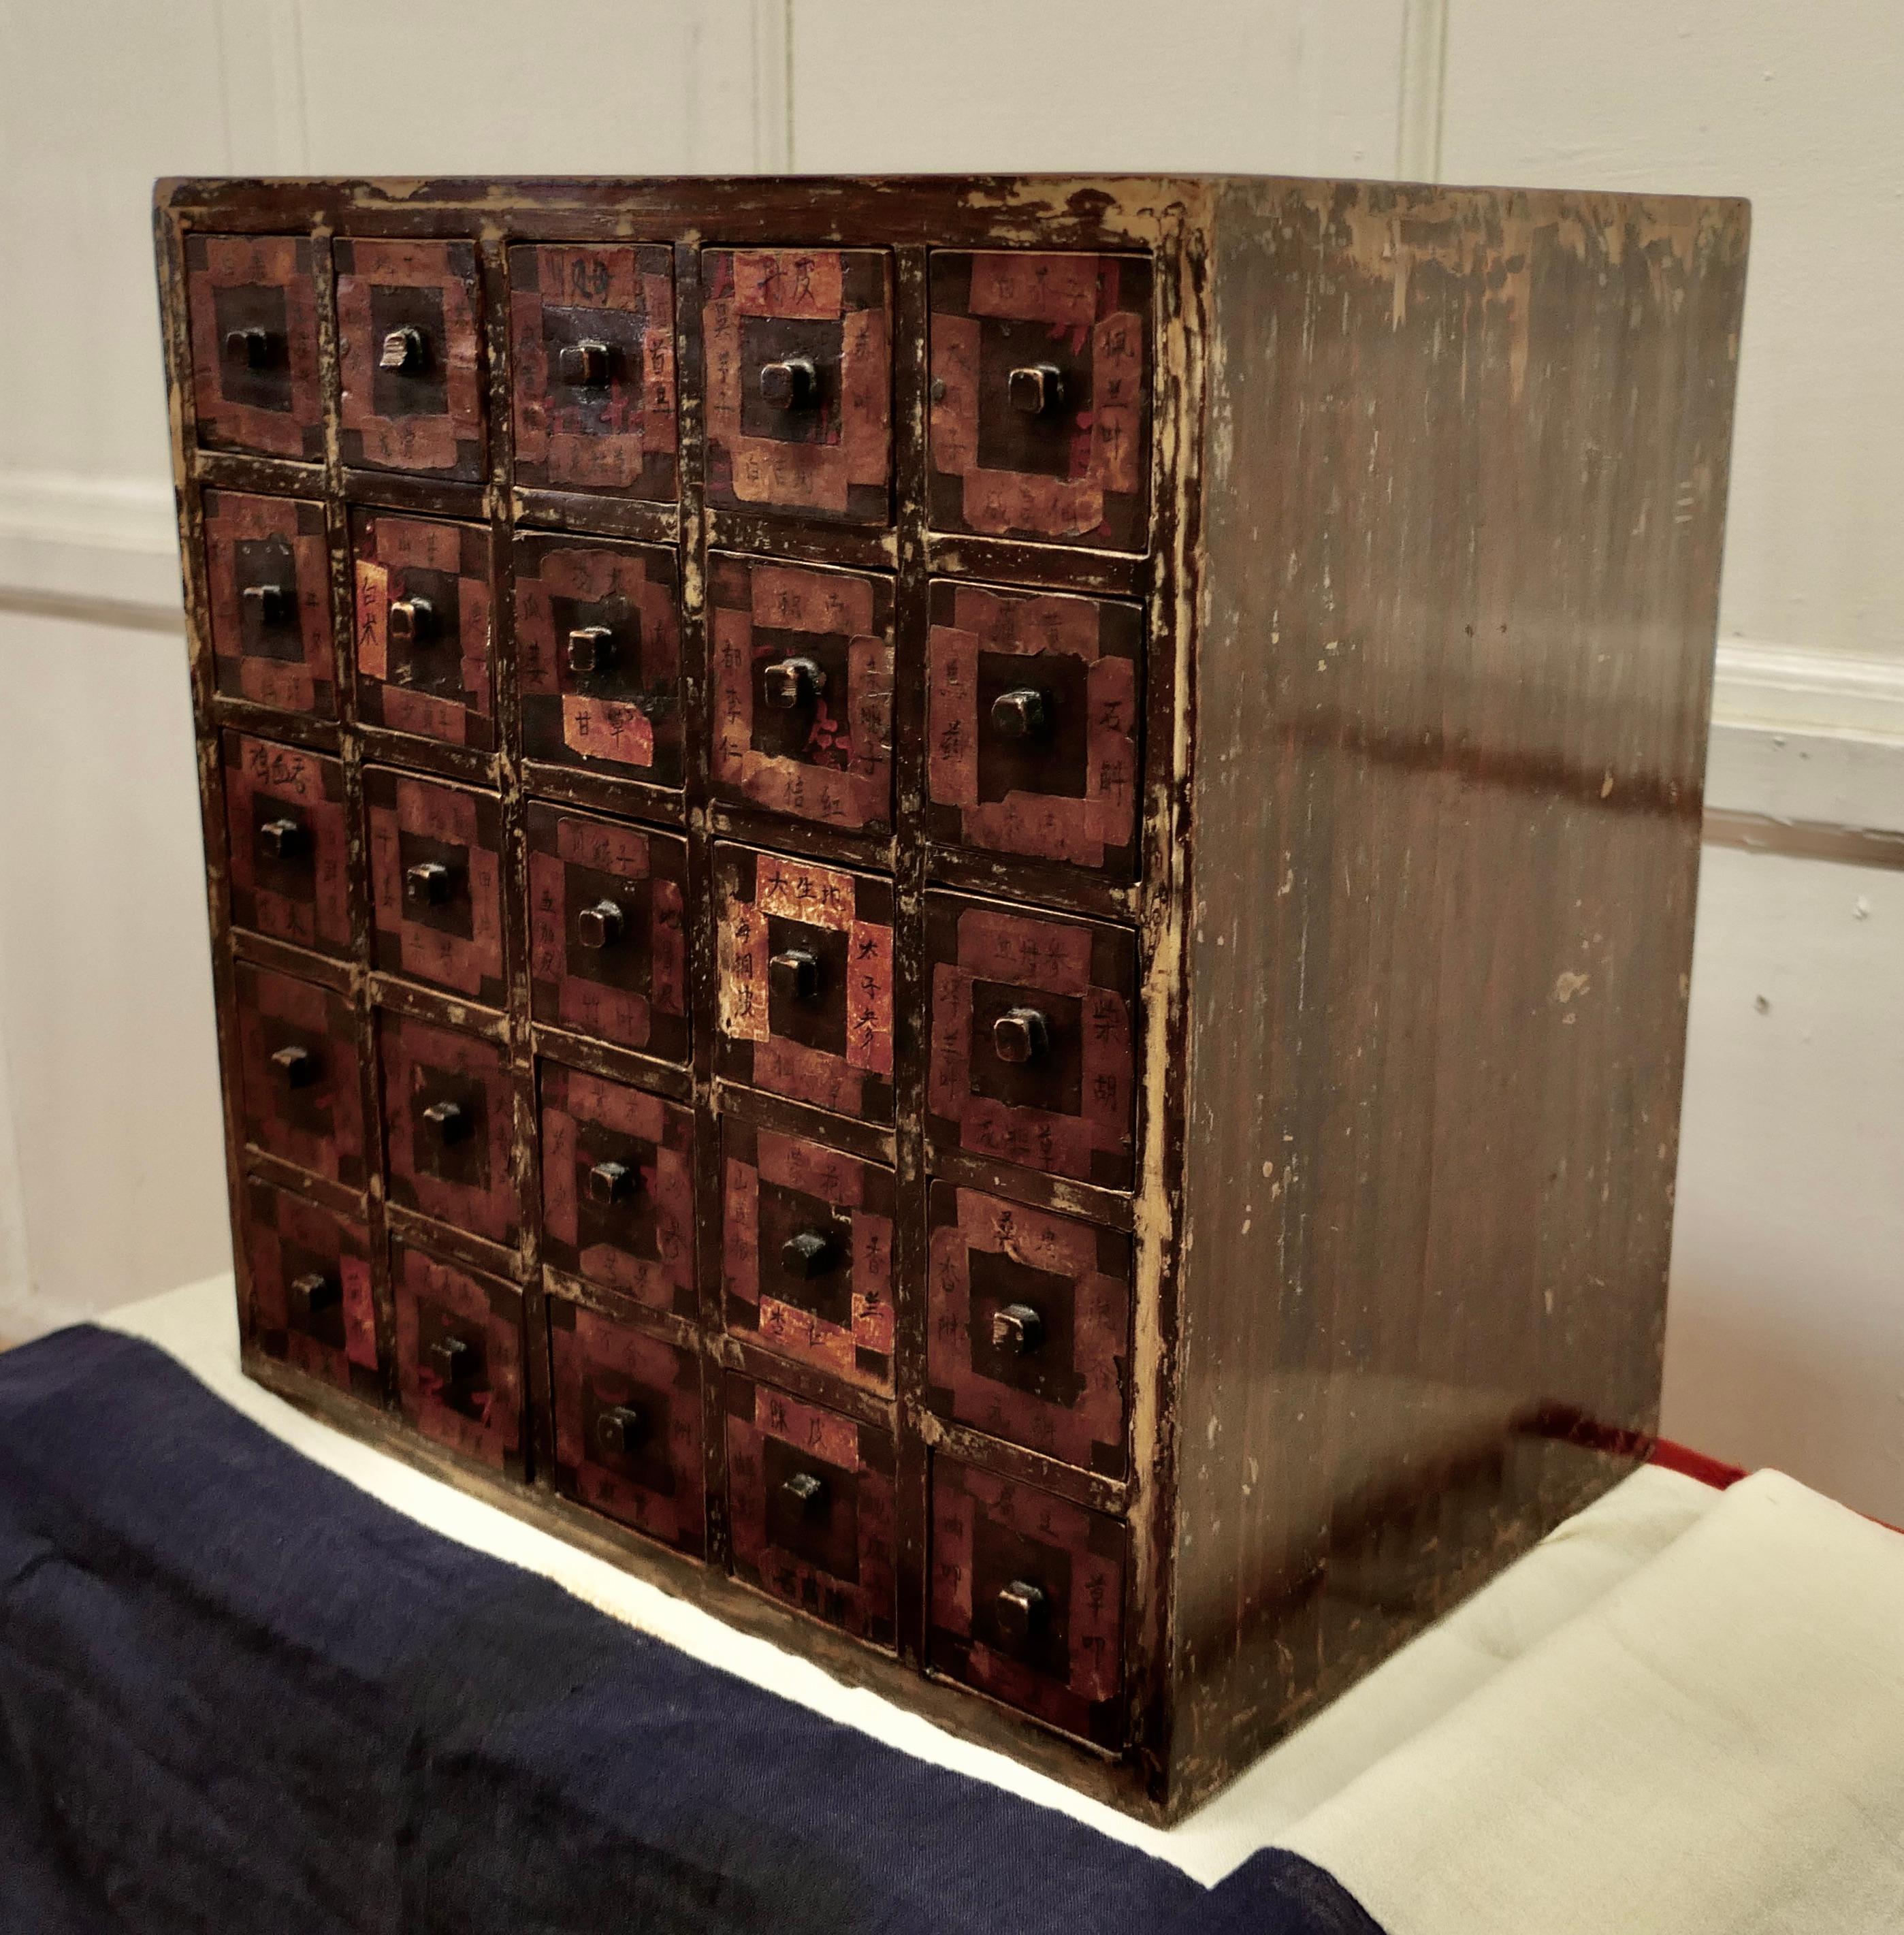 Rare Original Chinese Herbal Apothecary’s 25 drawer chest.

This is a Chinese Apothecary Cabinet it was once used by a Herbal Physician to keep the herbs and remedies used in Chinese Medicine 
The front of each drawer has very detailed medicine